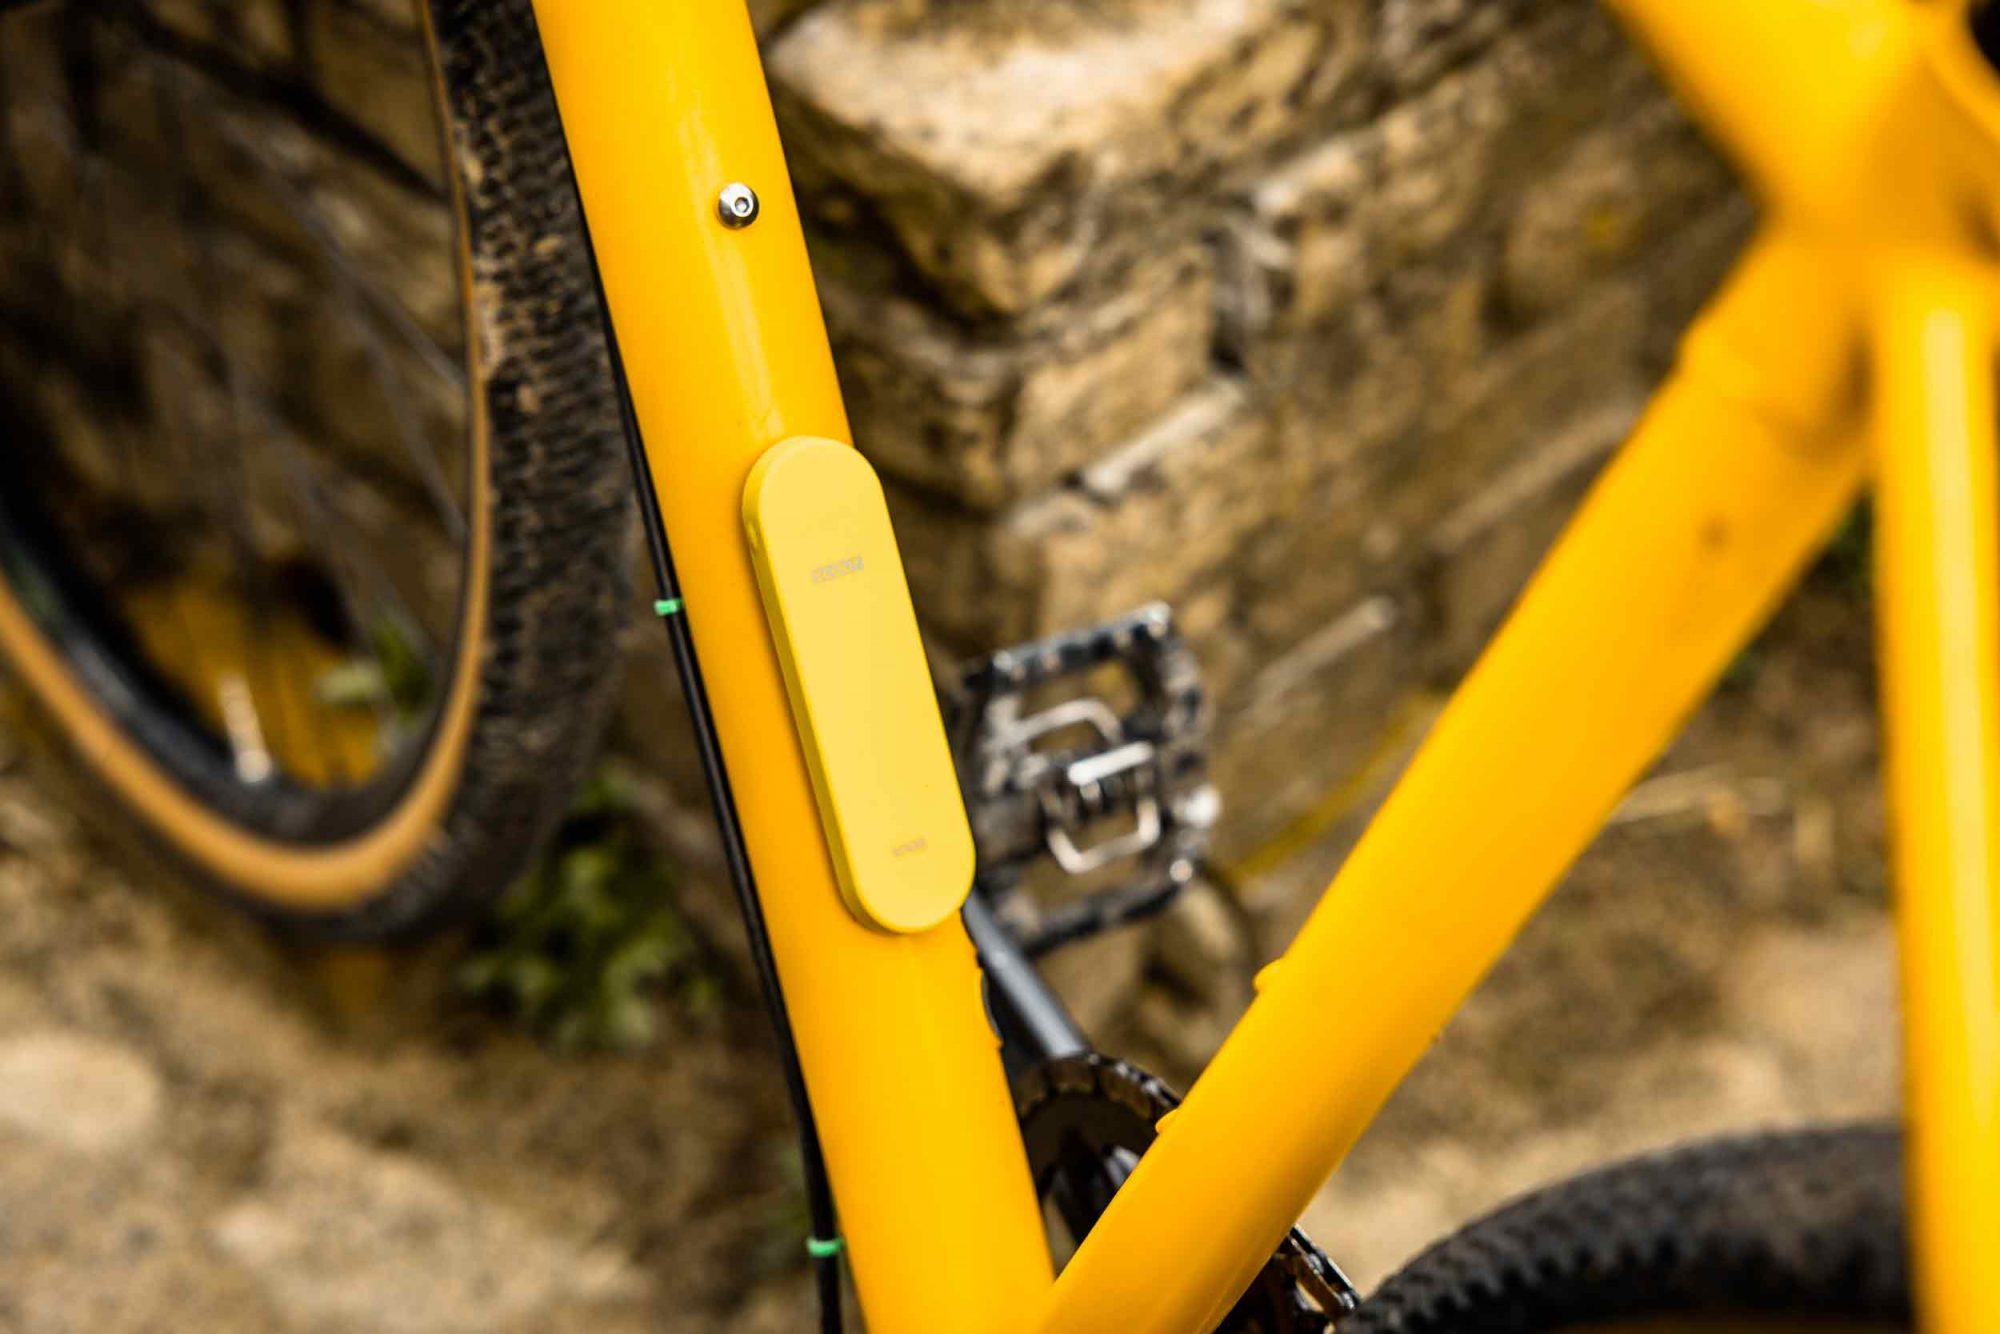 If you mount the knog scout gps bike tracker without a bottle cage, you can fit it with the matching neon-coloured neoprene cover. It also protects against water and dirt and is supposed to have a deterrent effect - at least that's what knog thought when choosing the colour.